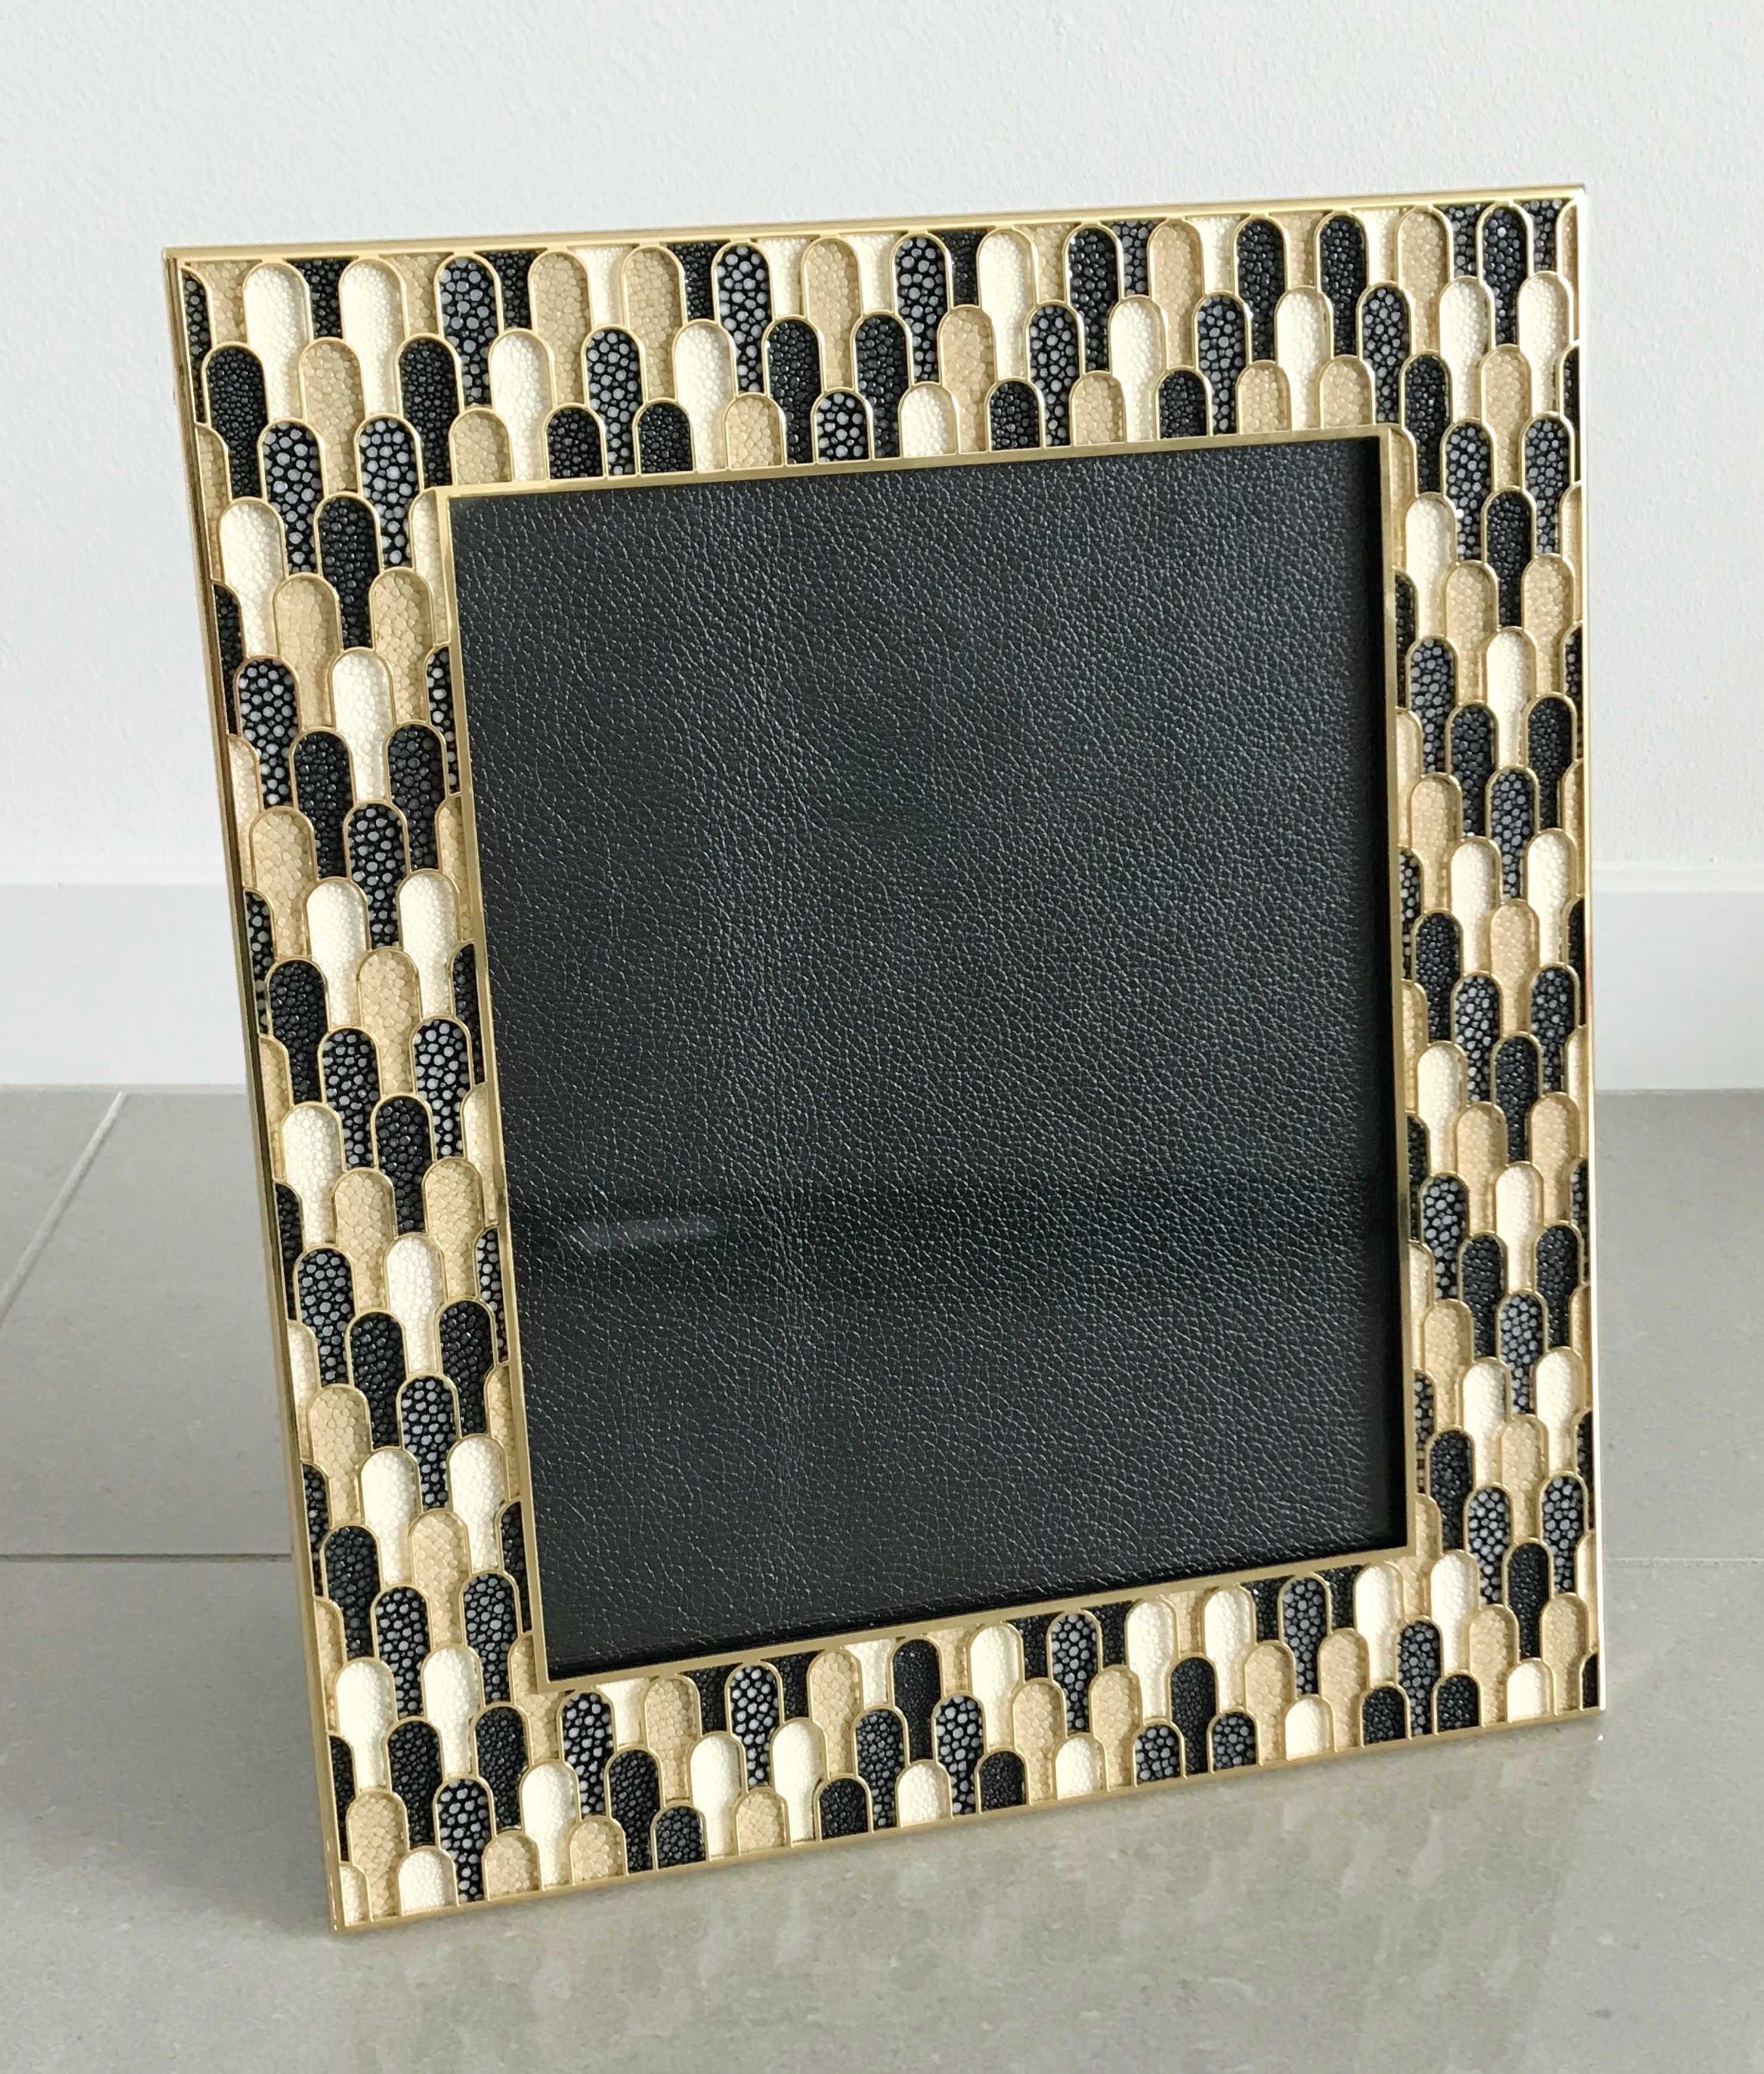 Multi-color shagreen leather and 24 karat gold-plated picture frame by Fabio Ltd
Measures: Height 13.5 inches, width 11.5 inches, depth 1 inch
Photo size: 8 inches by 10 inches
LAST 1 in stock in Los Angeles
Order Reference #: FABIOLTD PF76
This